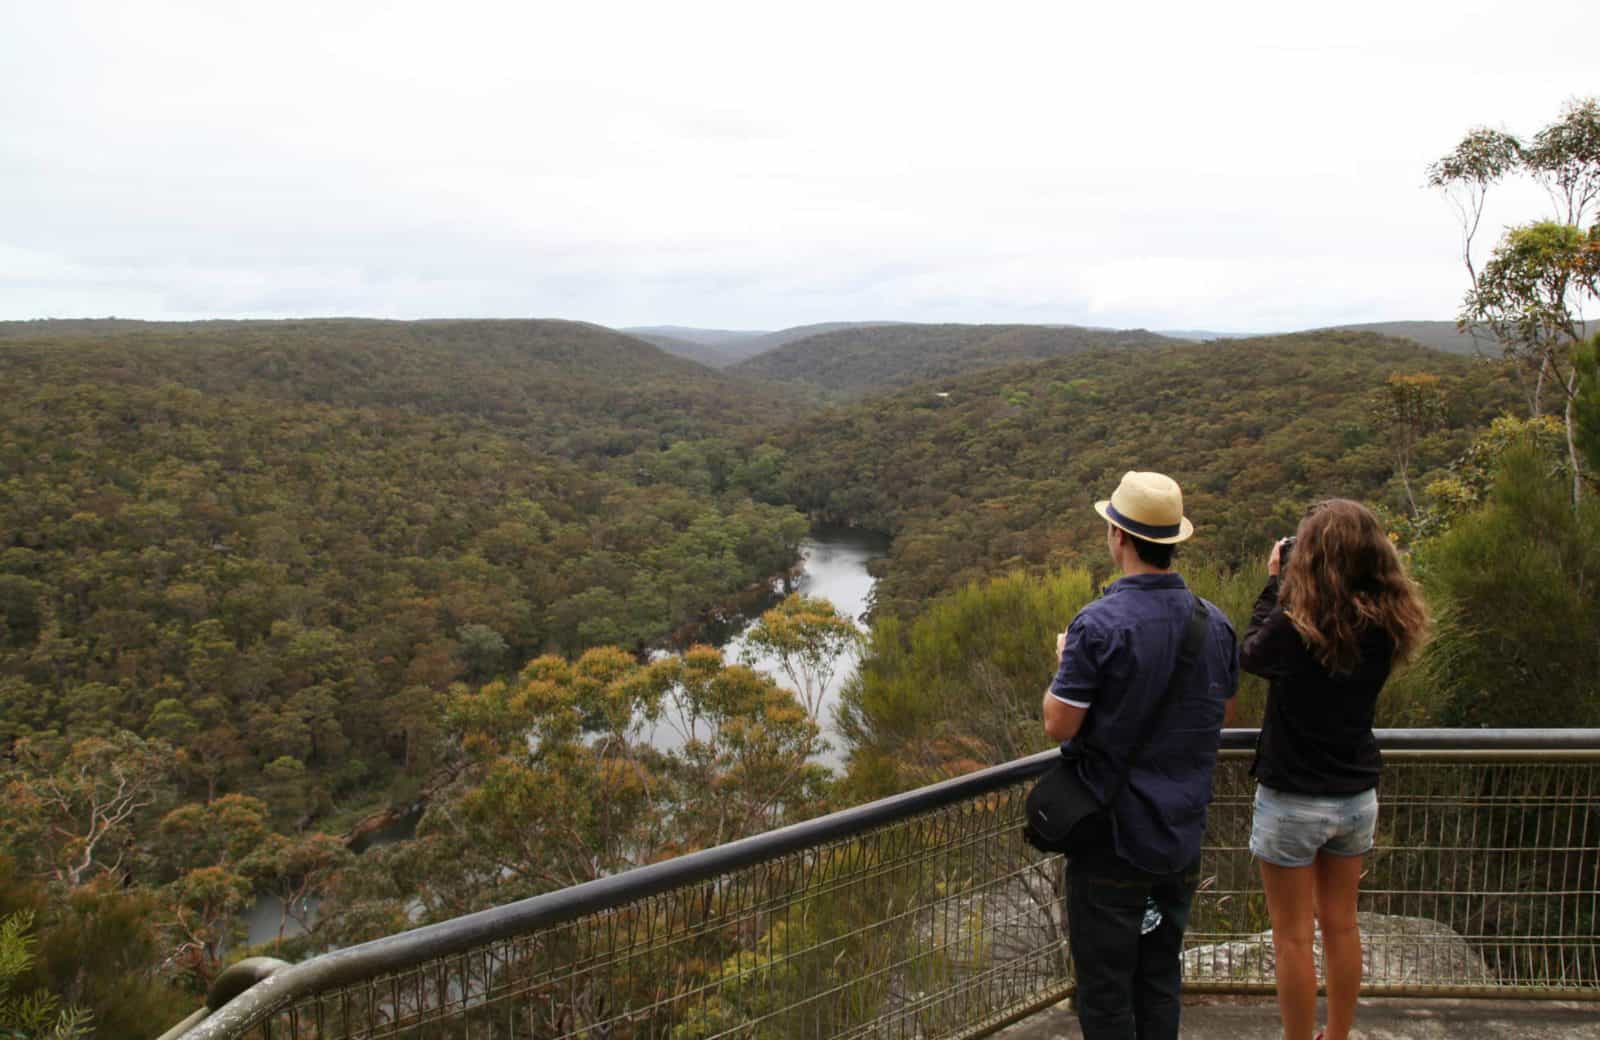 Bungoona path, Royal National Park. Photo: Andy Richards/NSW Government